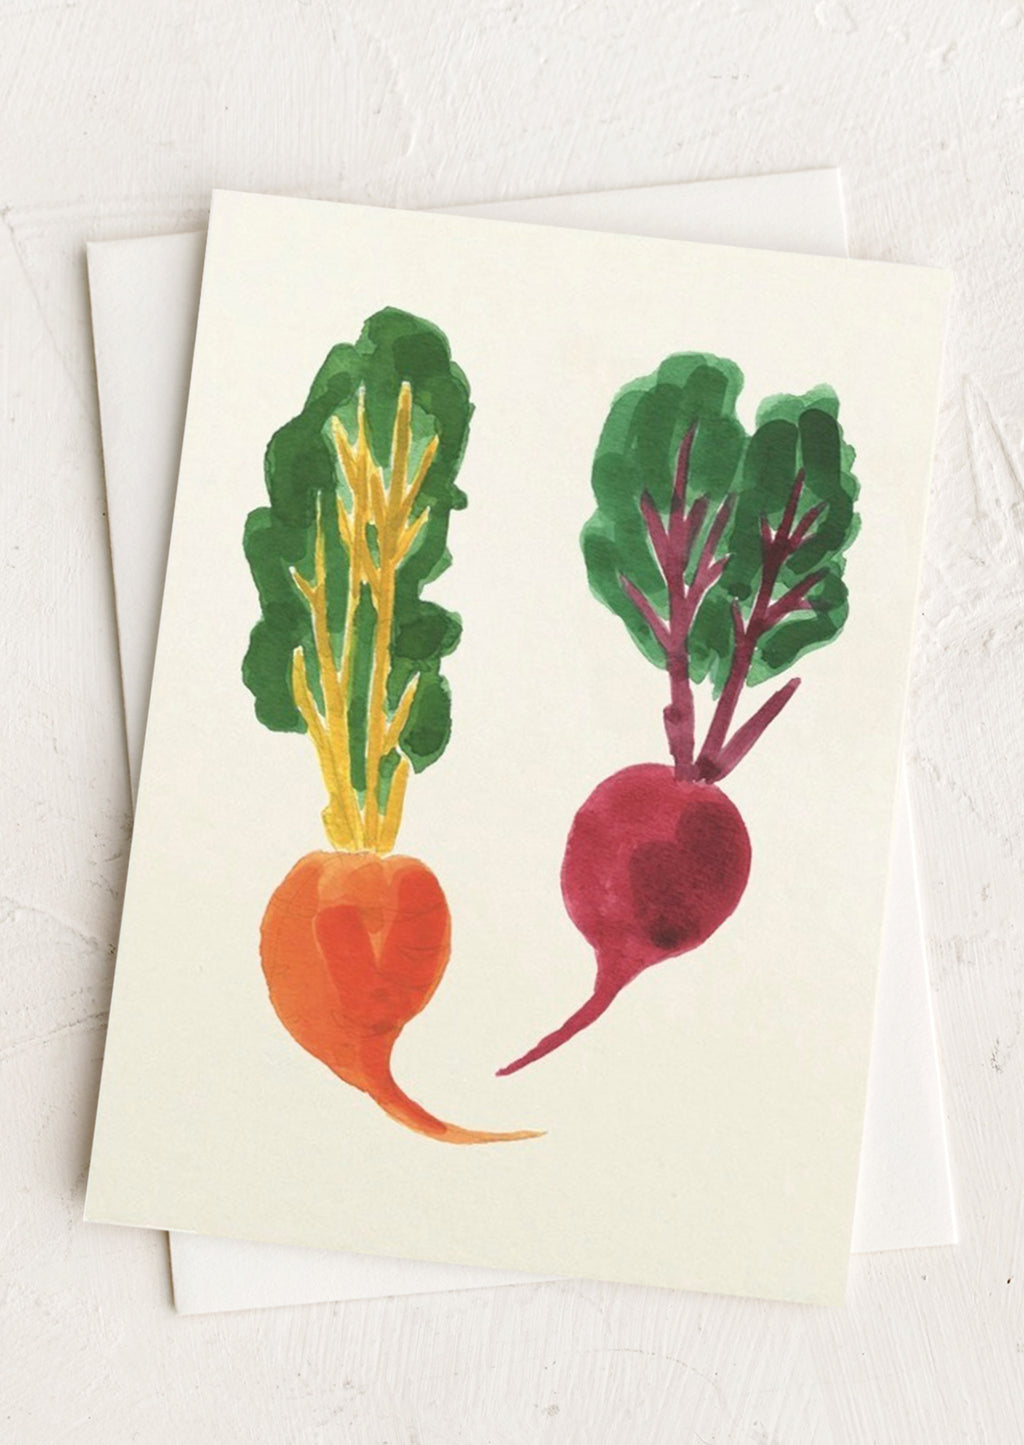 Beets: An illustrated card with image of two beets.